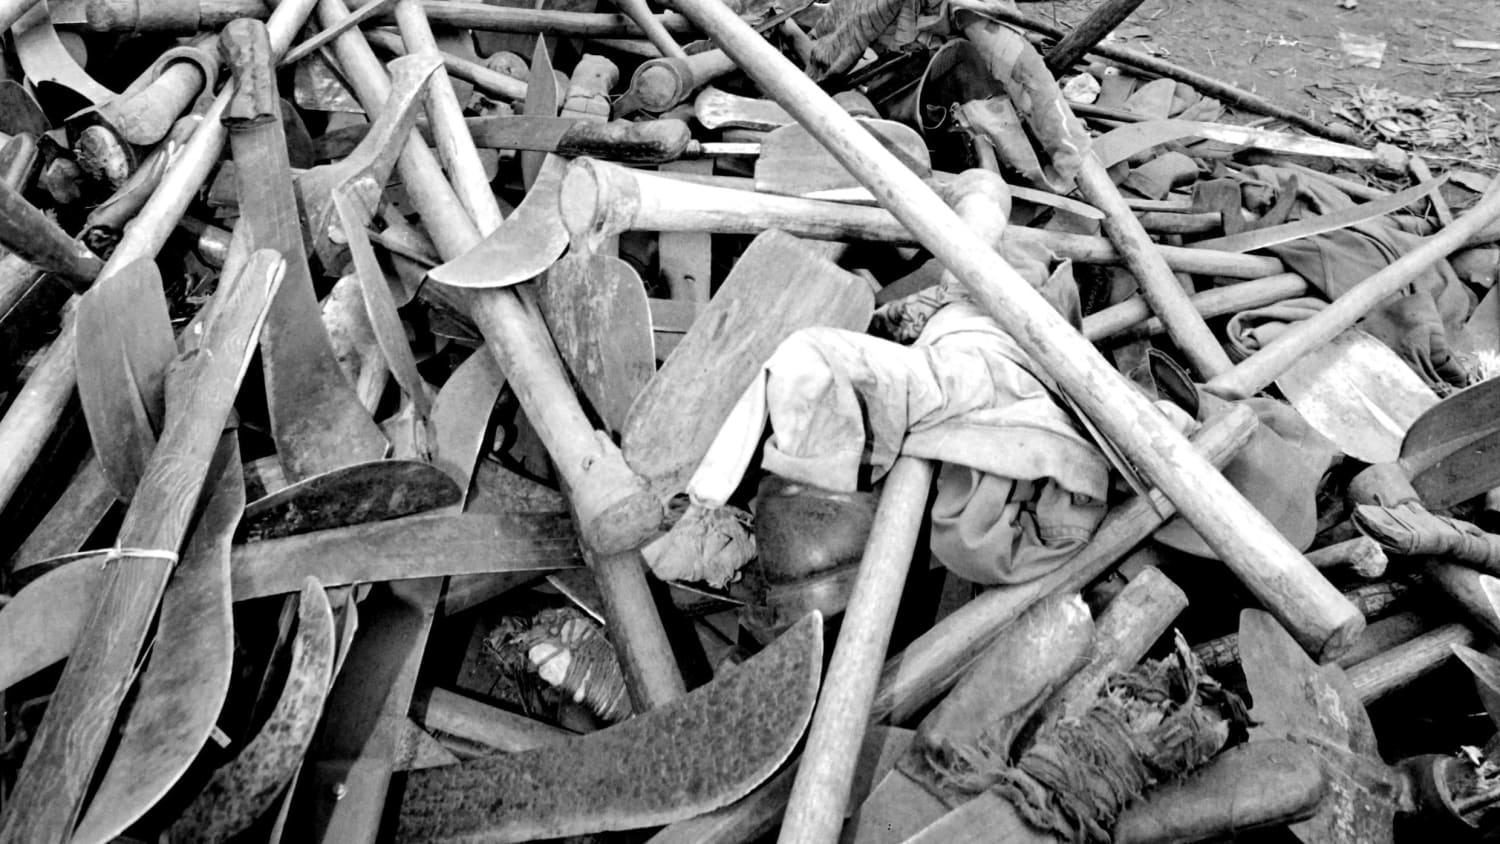 A pile of machetes and hatchets confiscated from Hutu militias who fled Rwanda in the aftermath of the Rwandan Genocide. Goma, Zaire (now Democratic Republic of the Congo), July 1994.